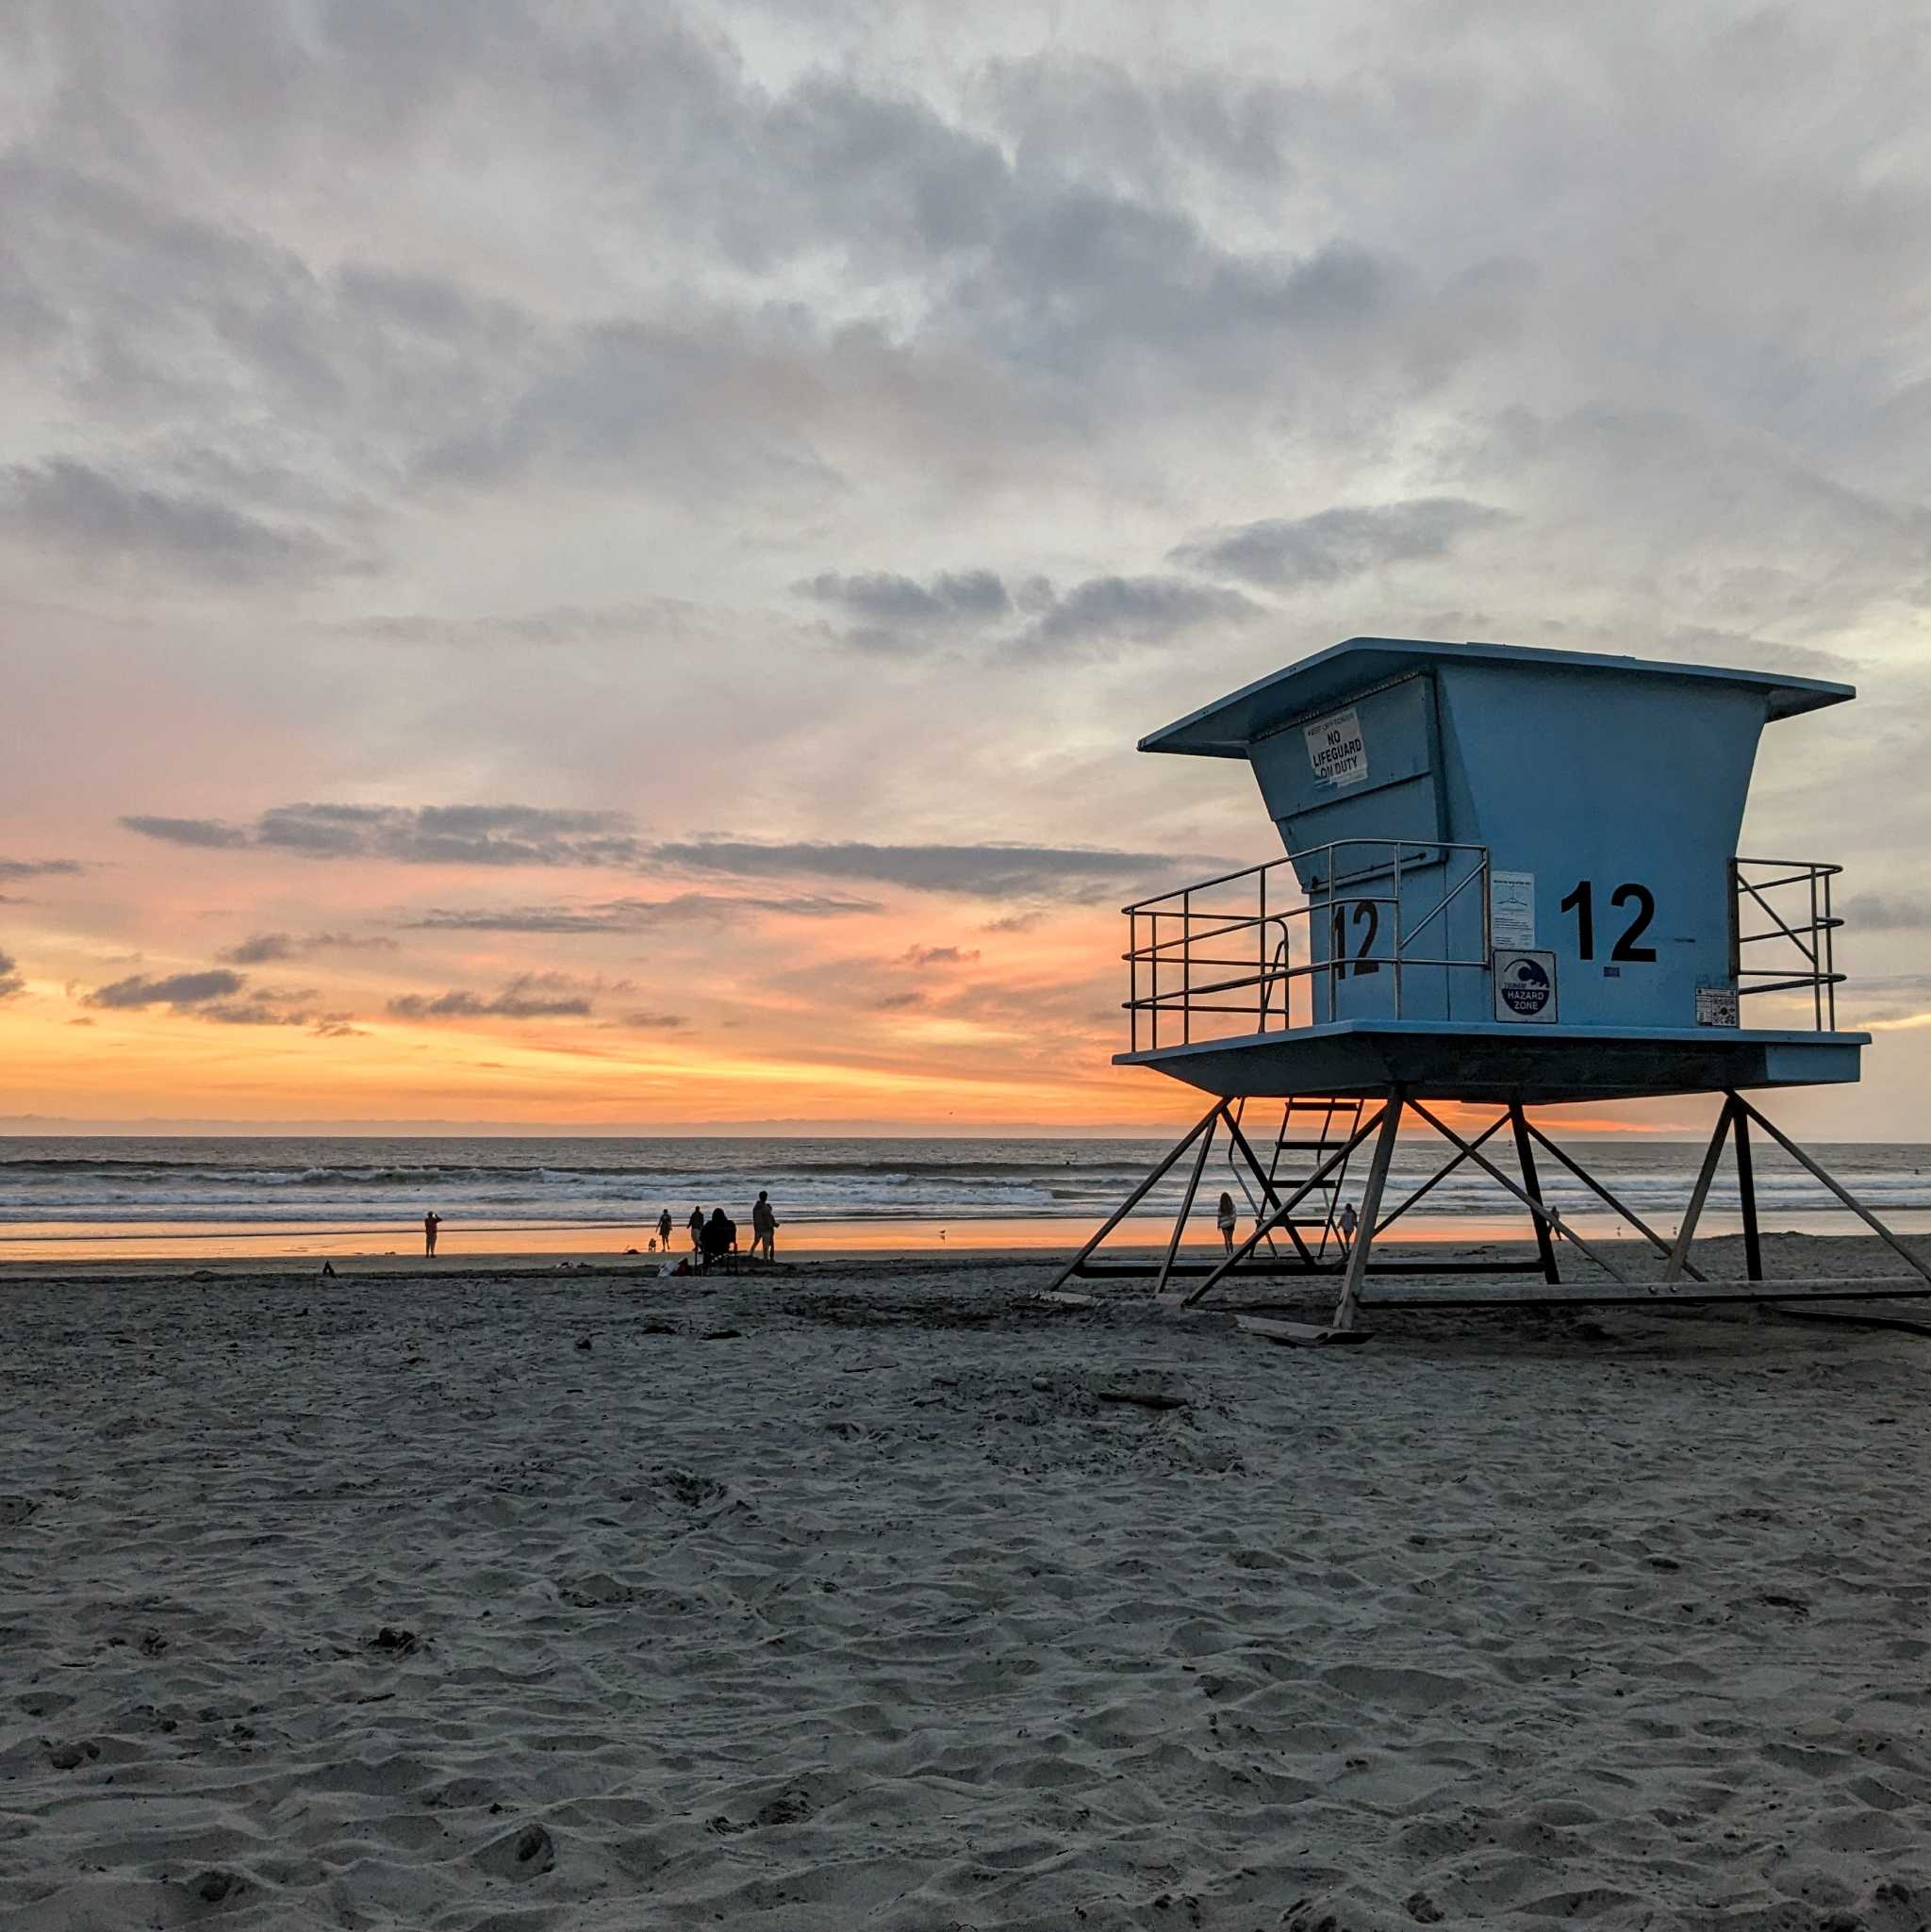 Looking out from a beach at a colorful sunset with a lifeguard tower in the foreground.